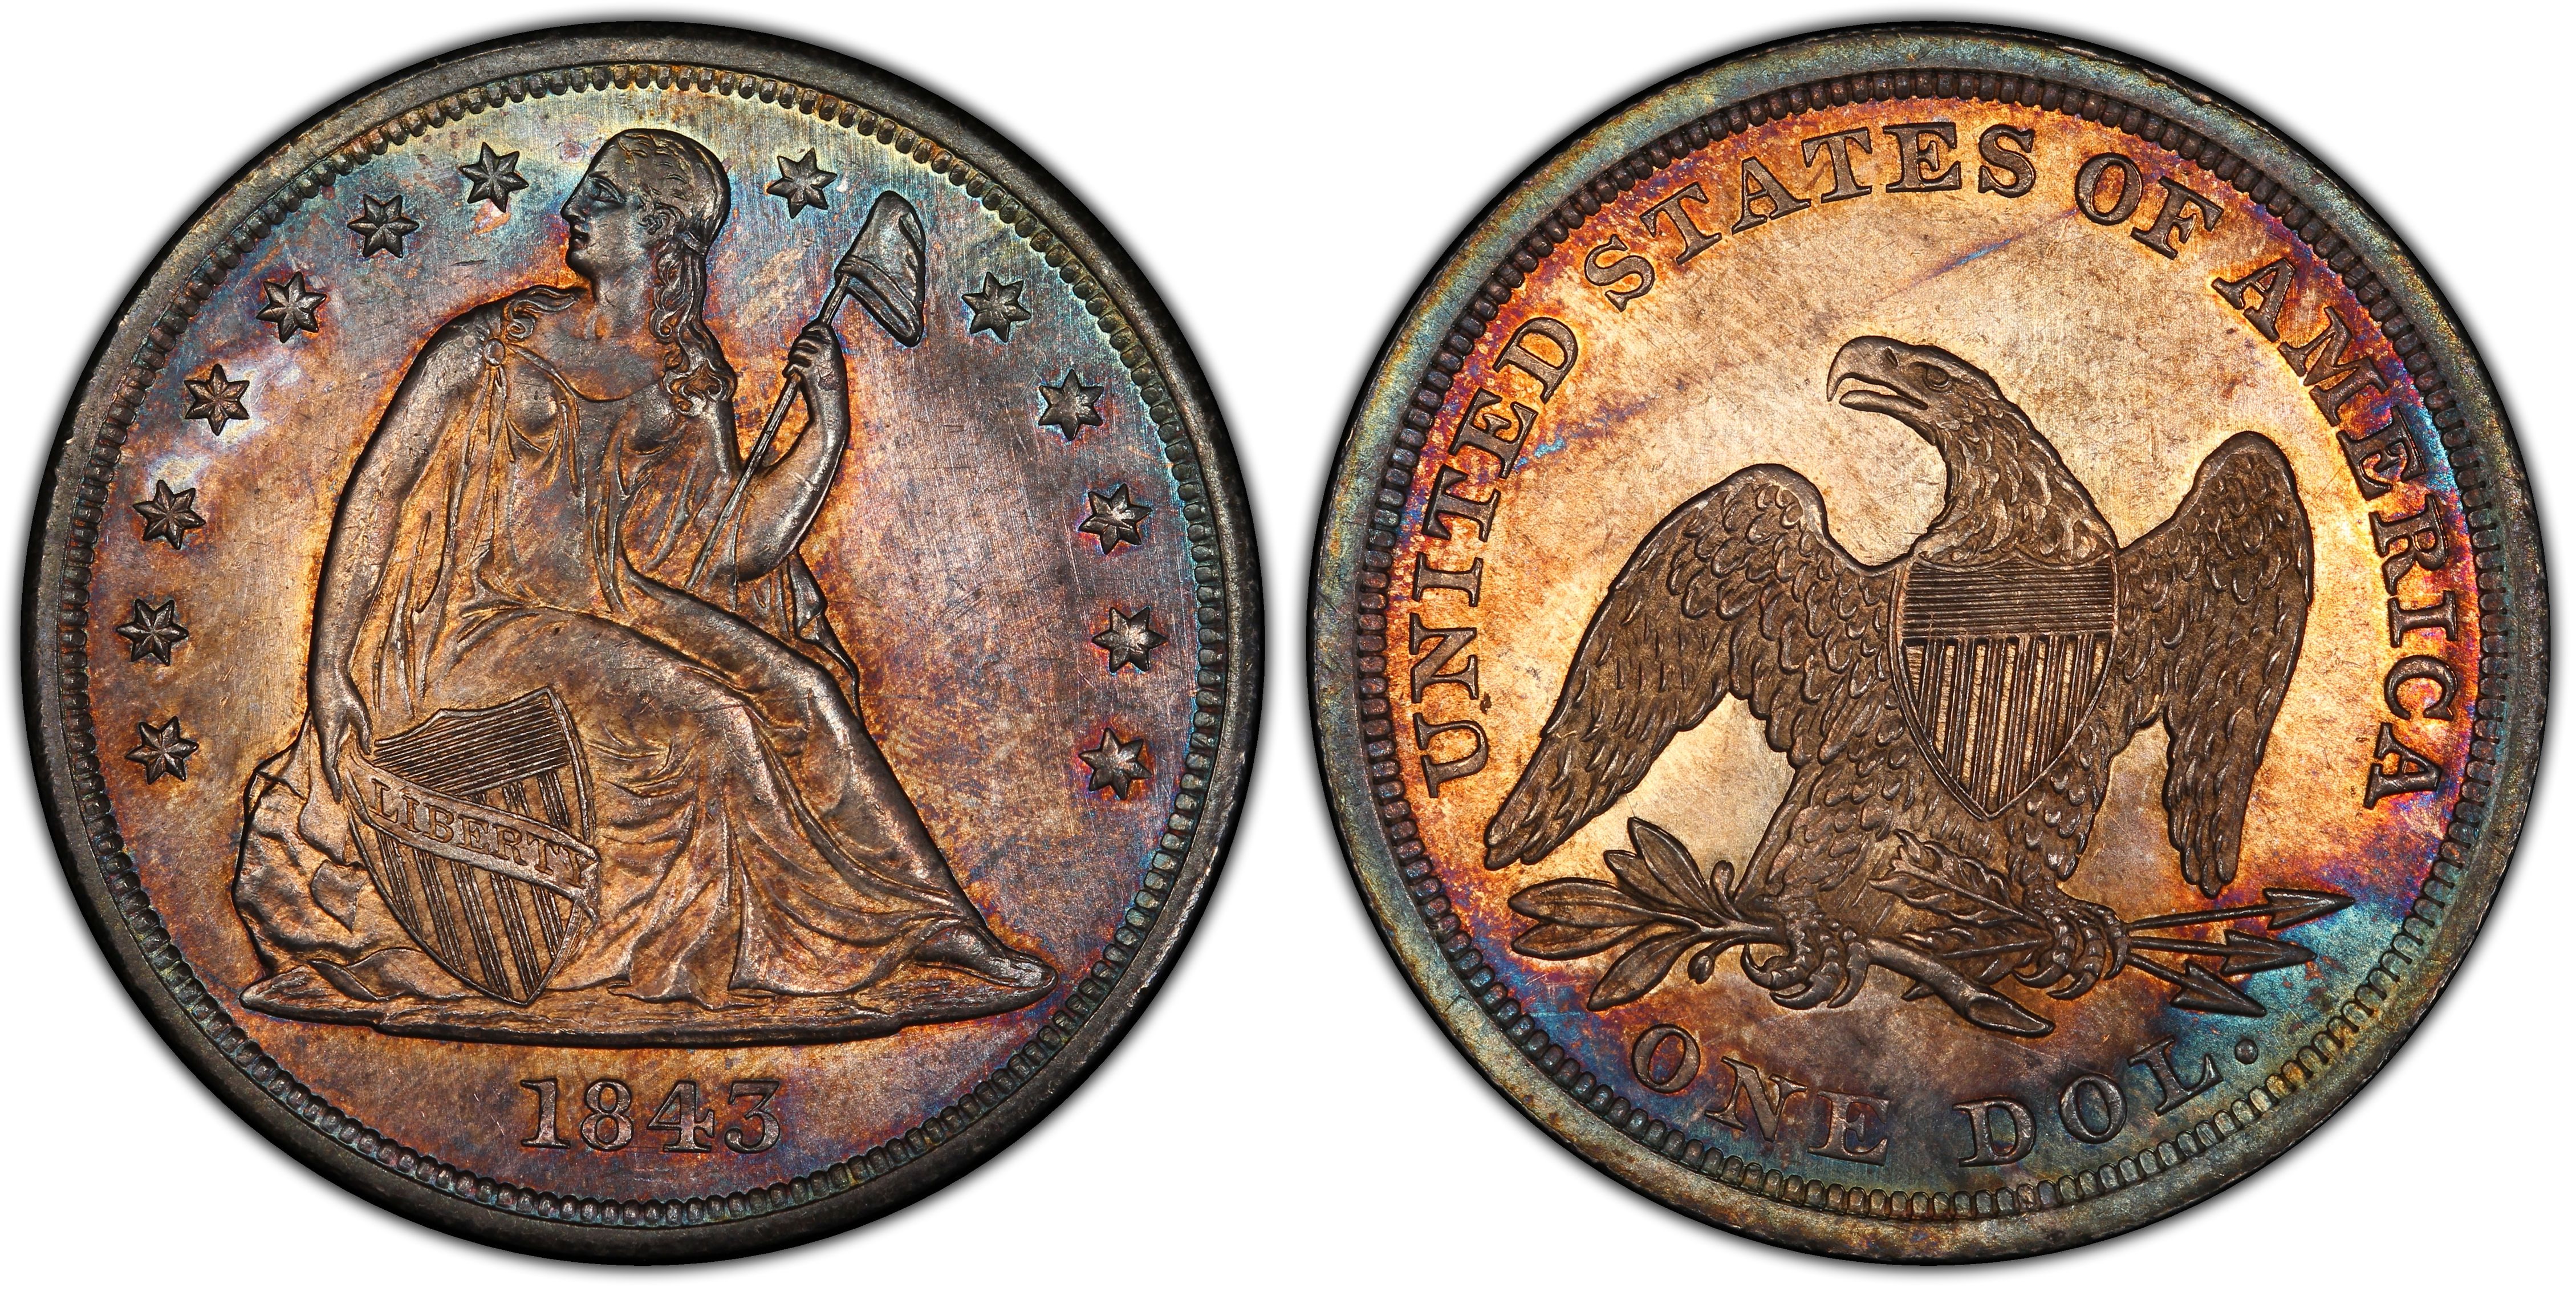 1843 $1 (Regular Strike) Liberty Seated Dollar - PCGS CoinFacts